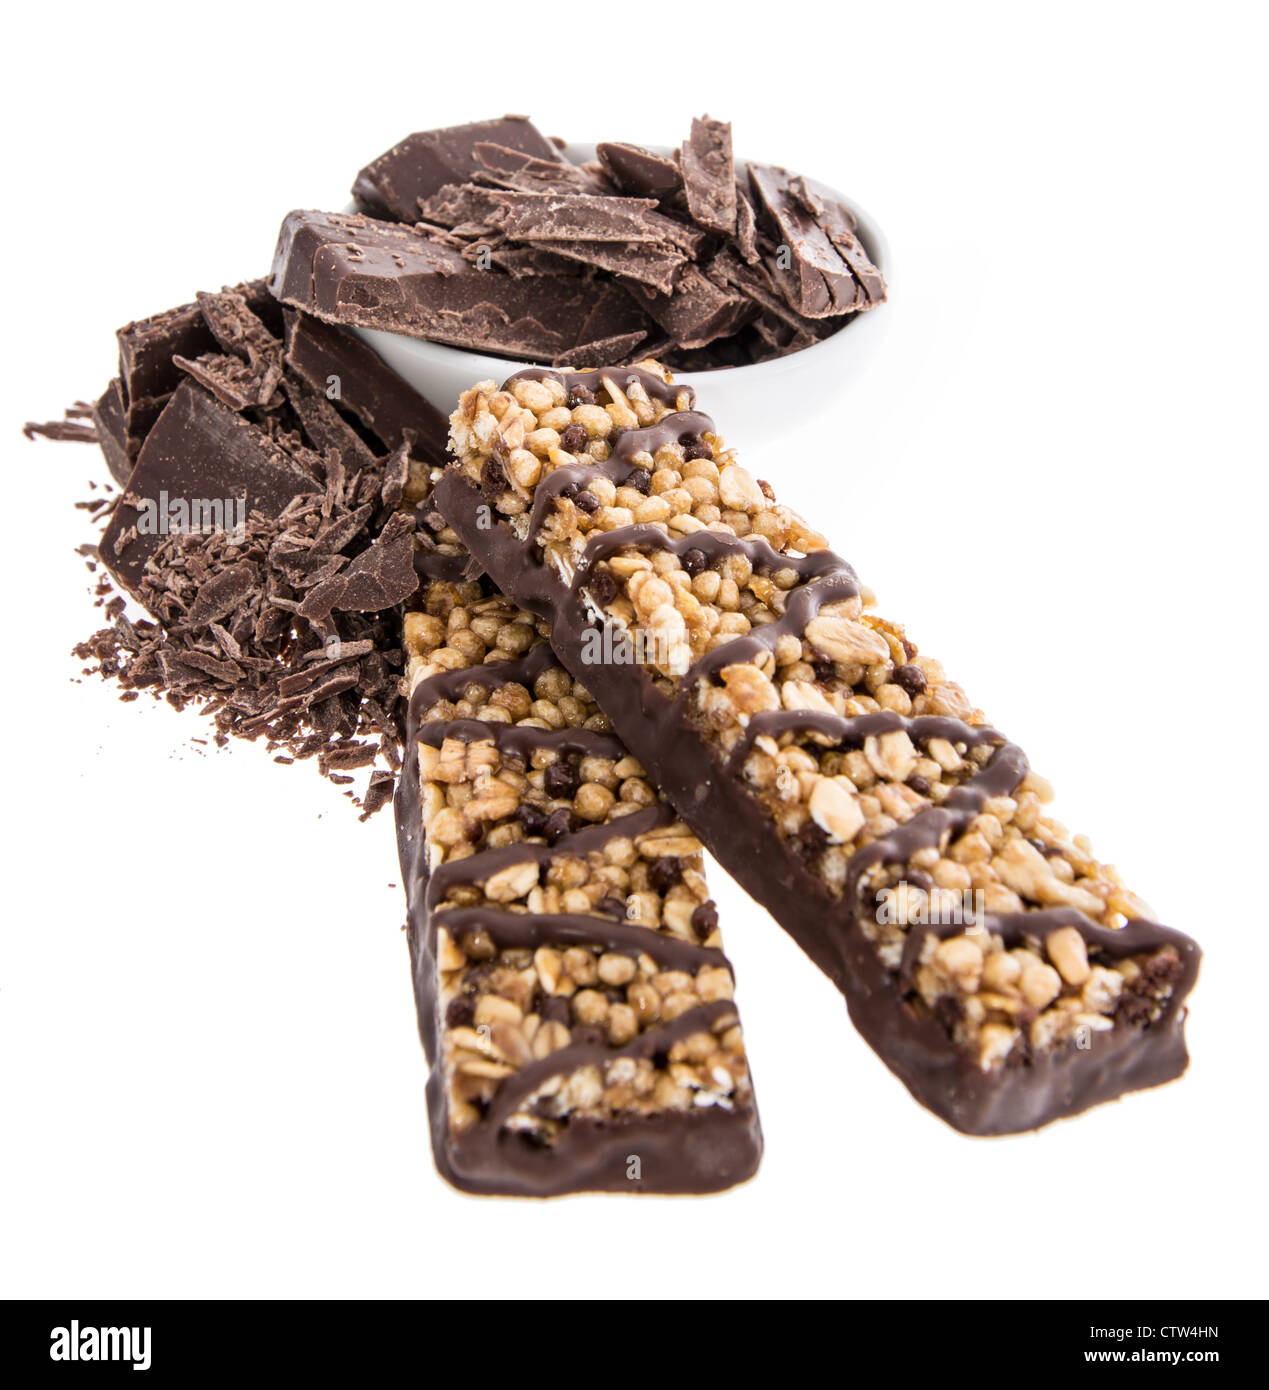 Muesli bar with Chocolate pieces isolated on white background Stock Photo